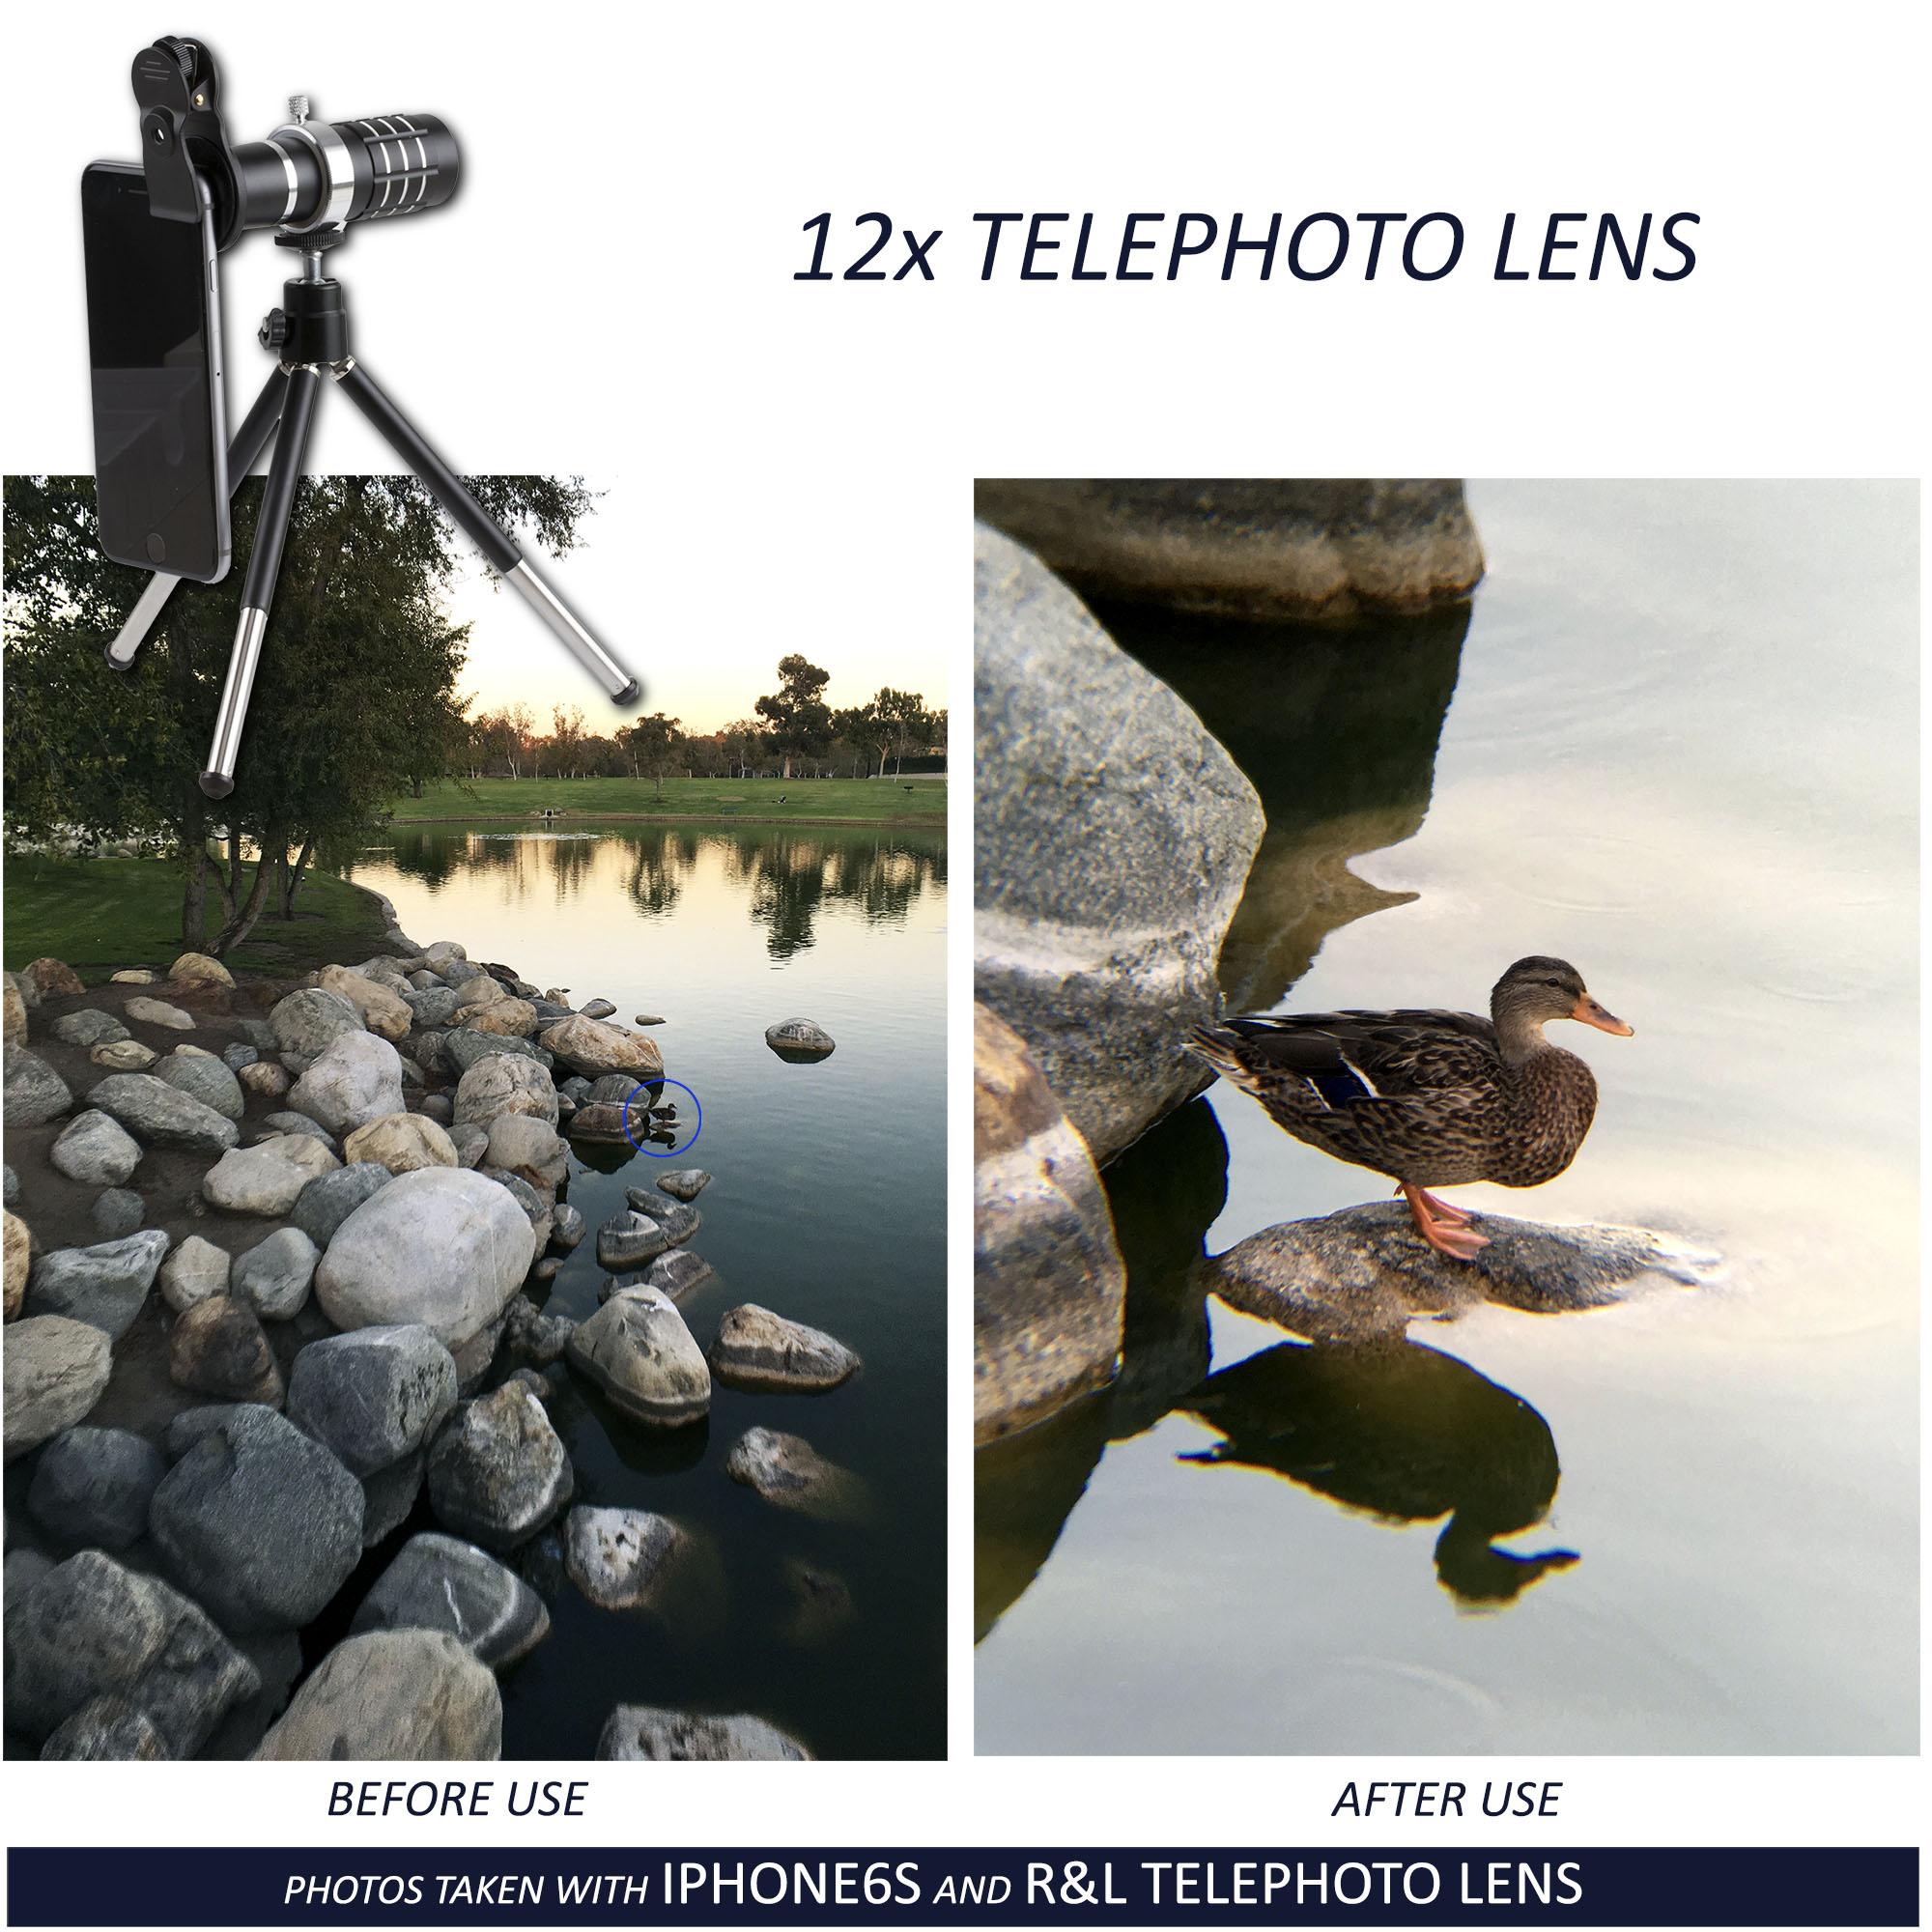 R&L Telephoto Lens for Smartphone, Mobile Camera Kit with 12X Telephoto, Wide Angle and Macro Lenses 3 in 1 - image 3 of 7